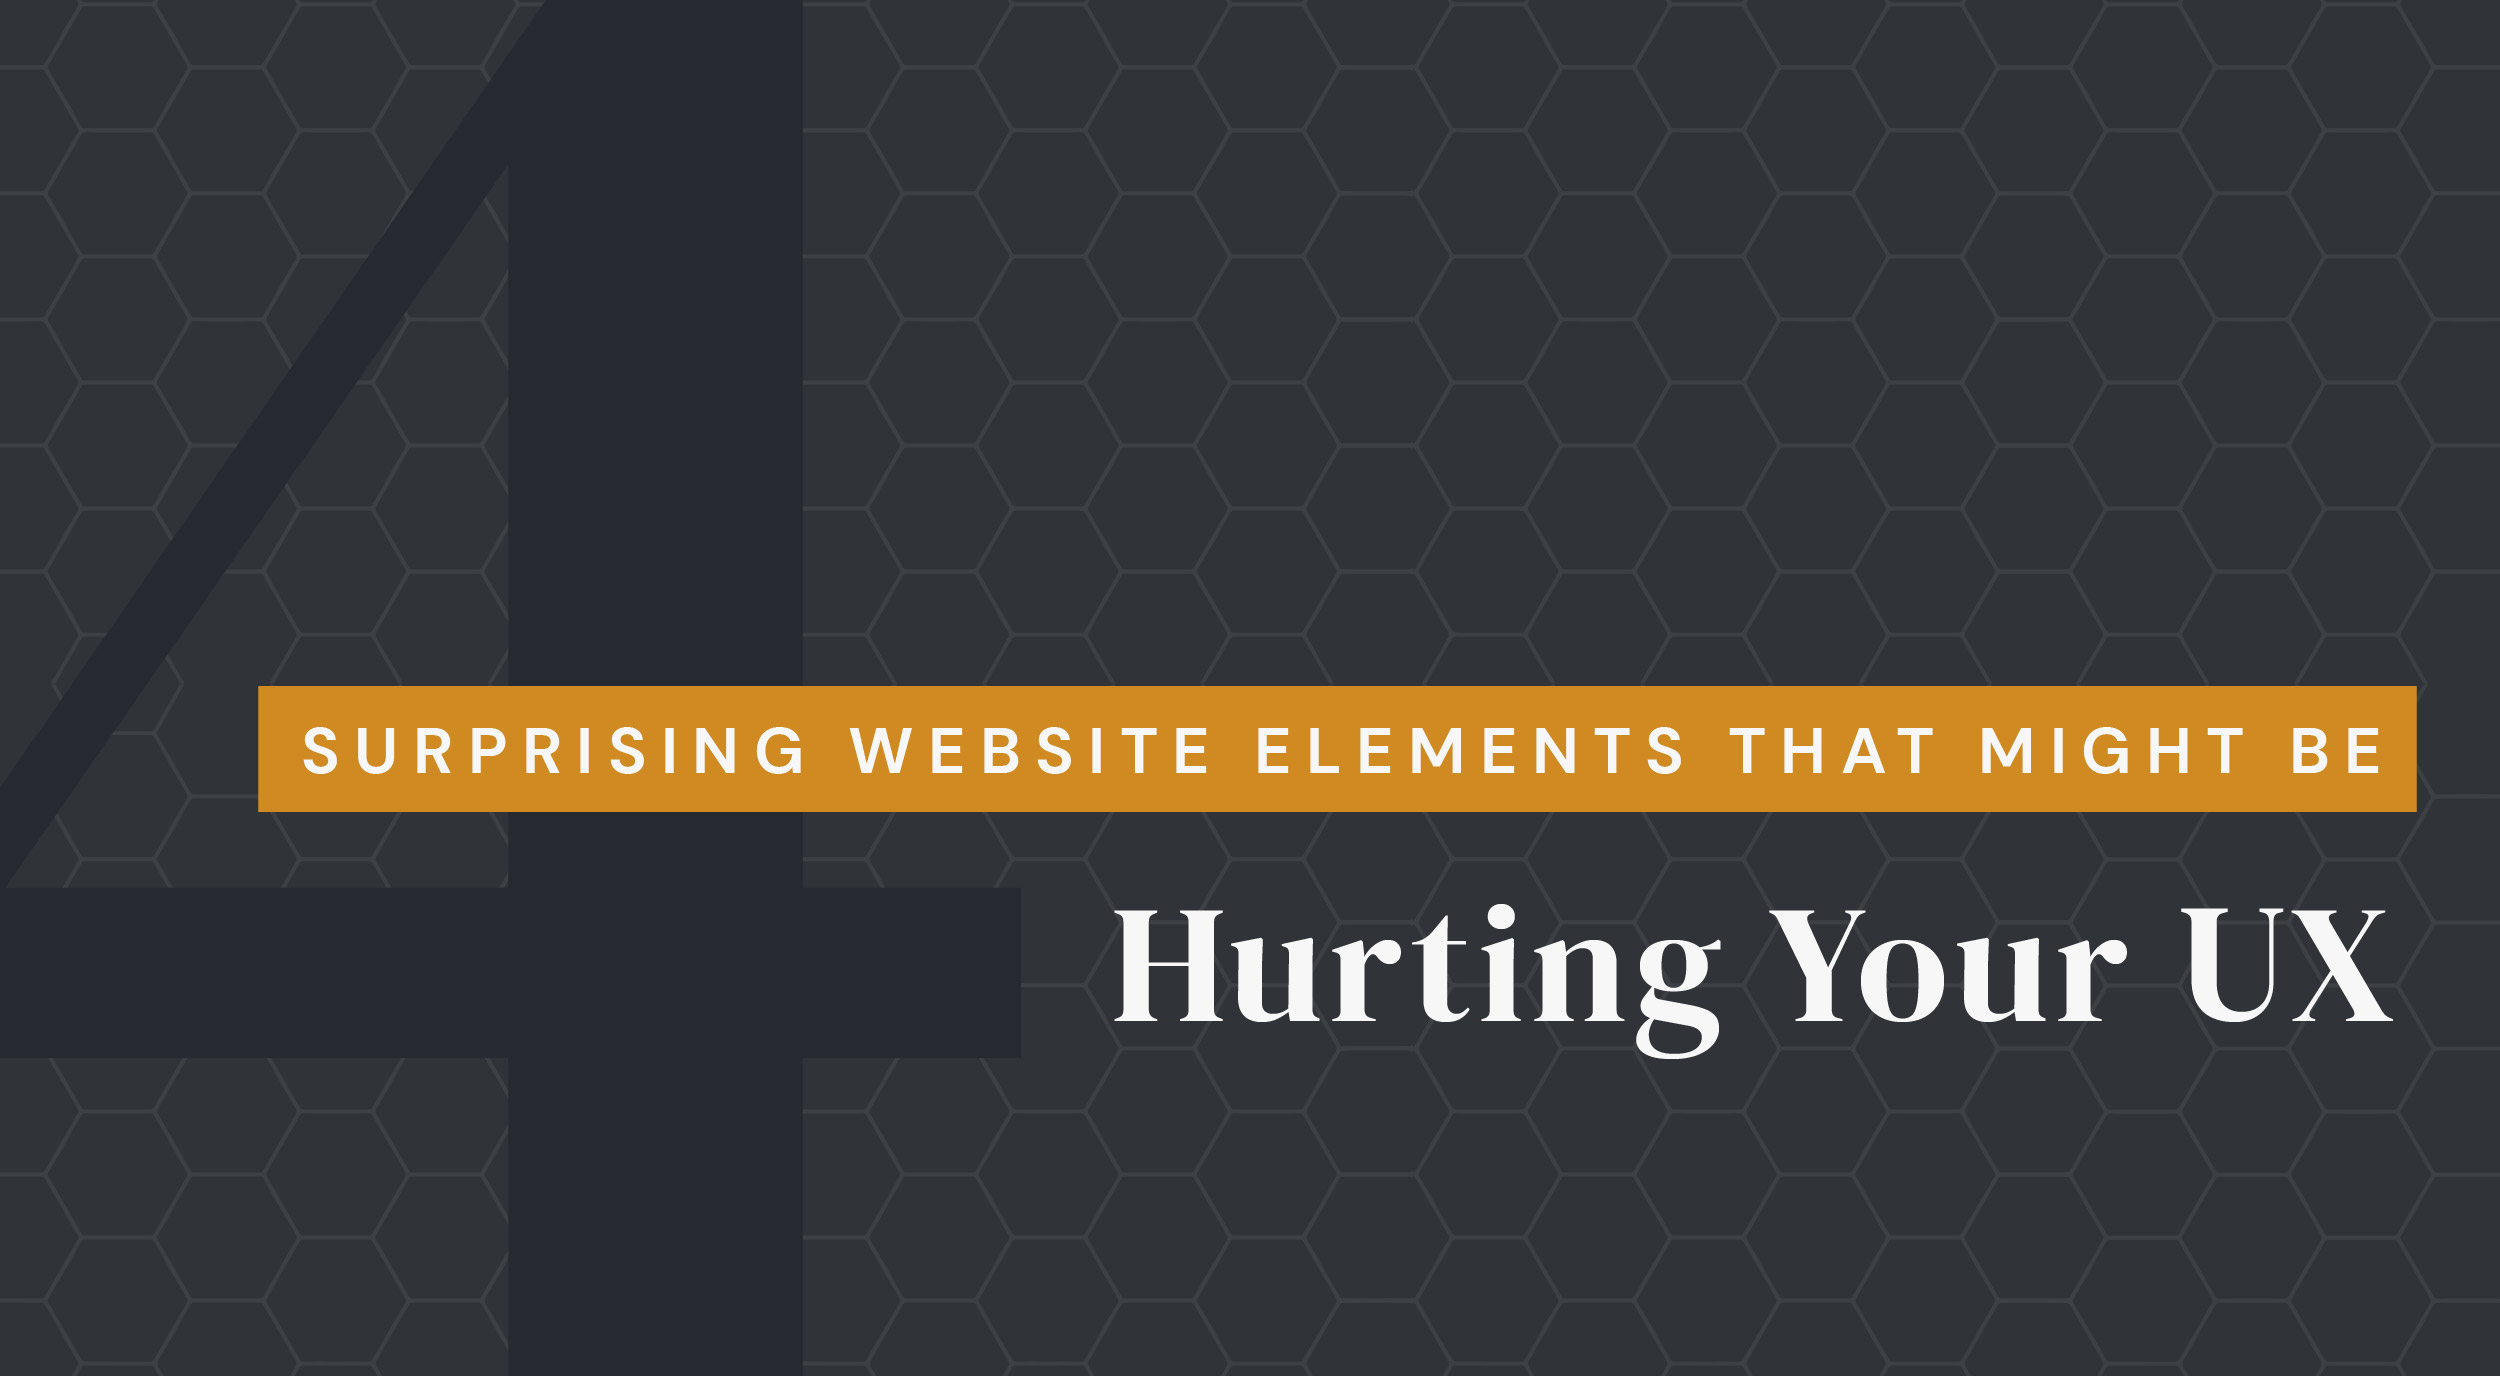 website elements that could hurt your ux